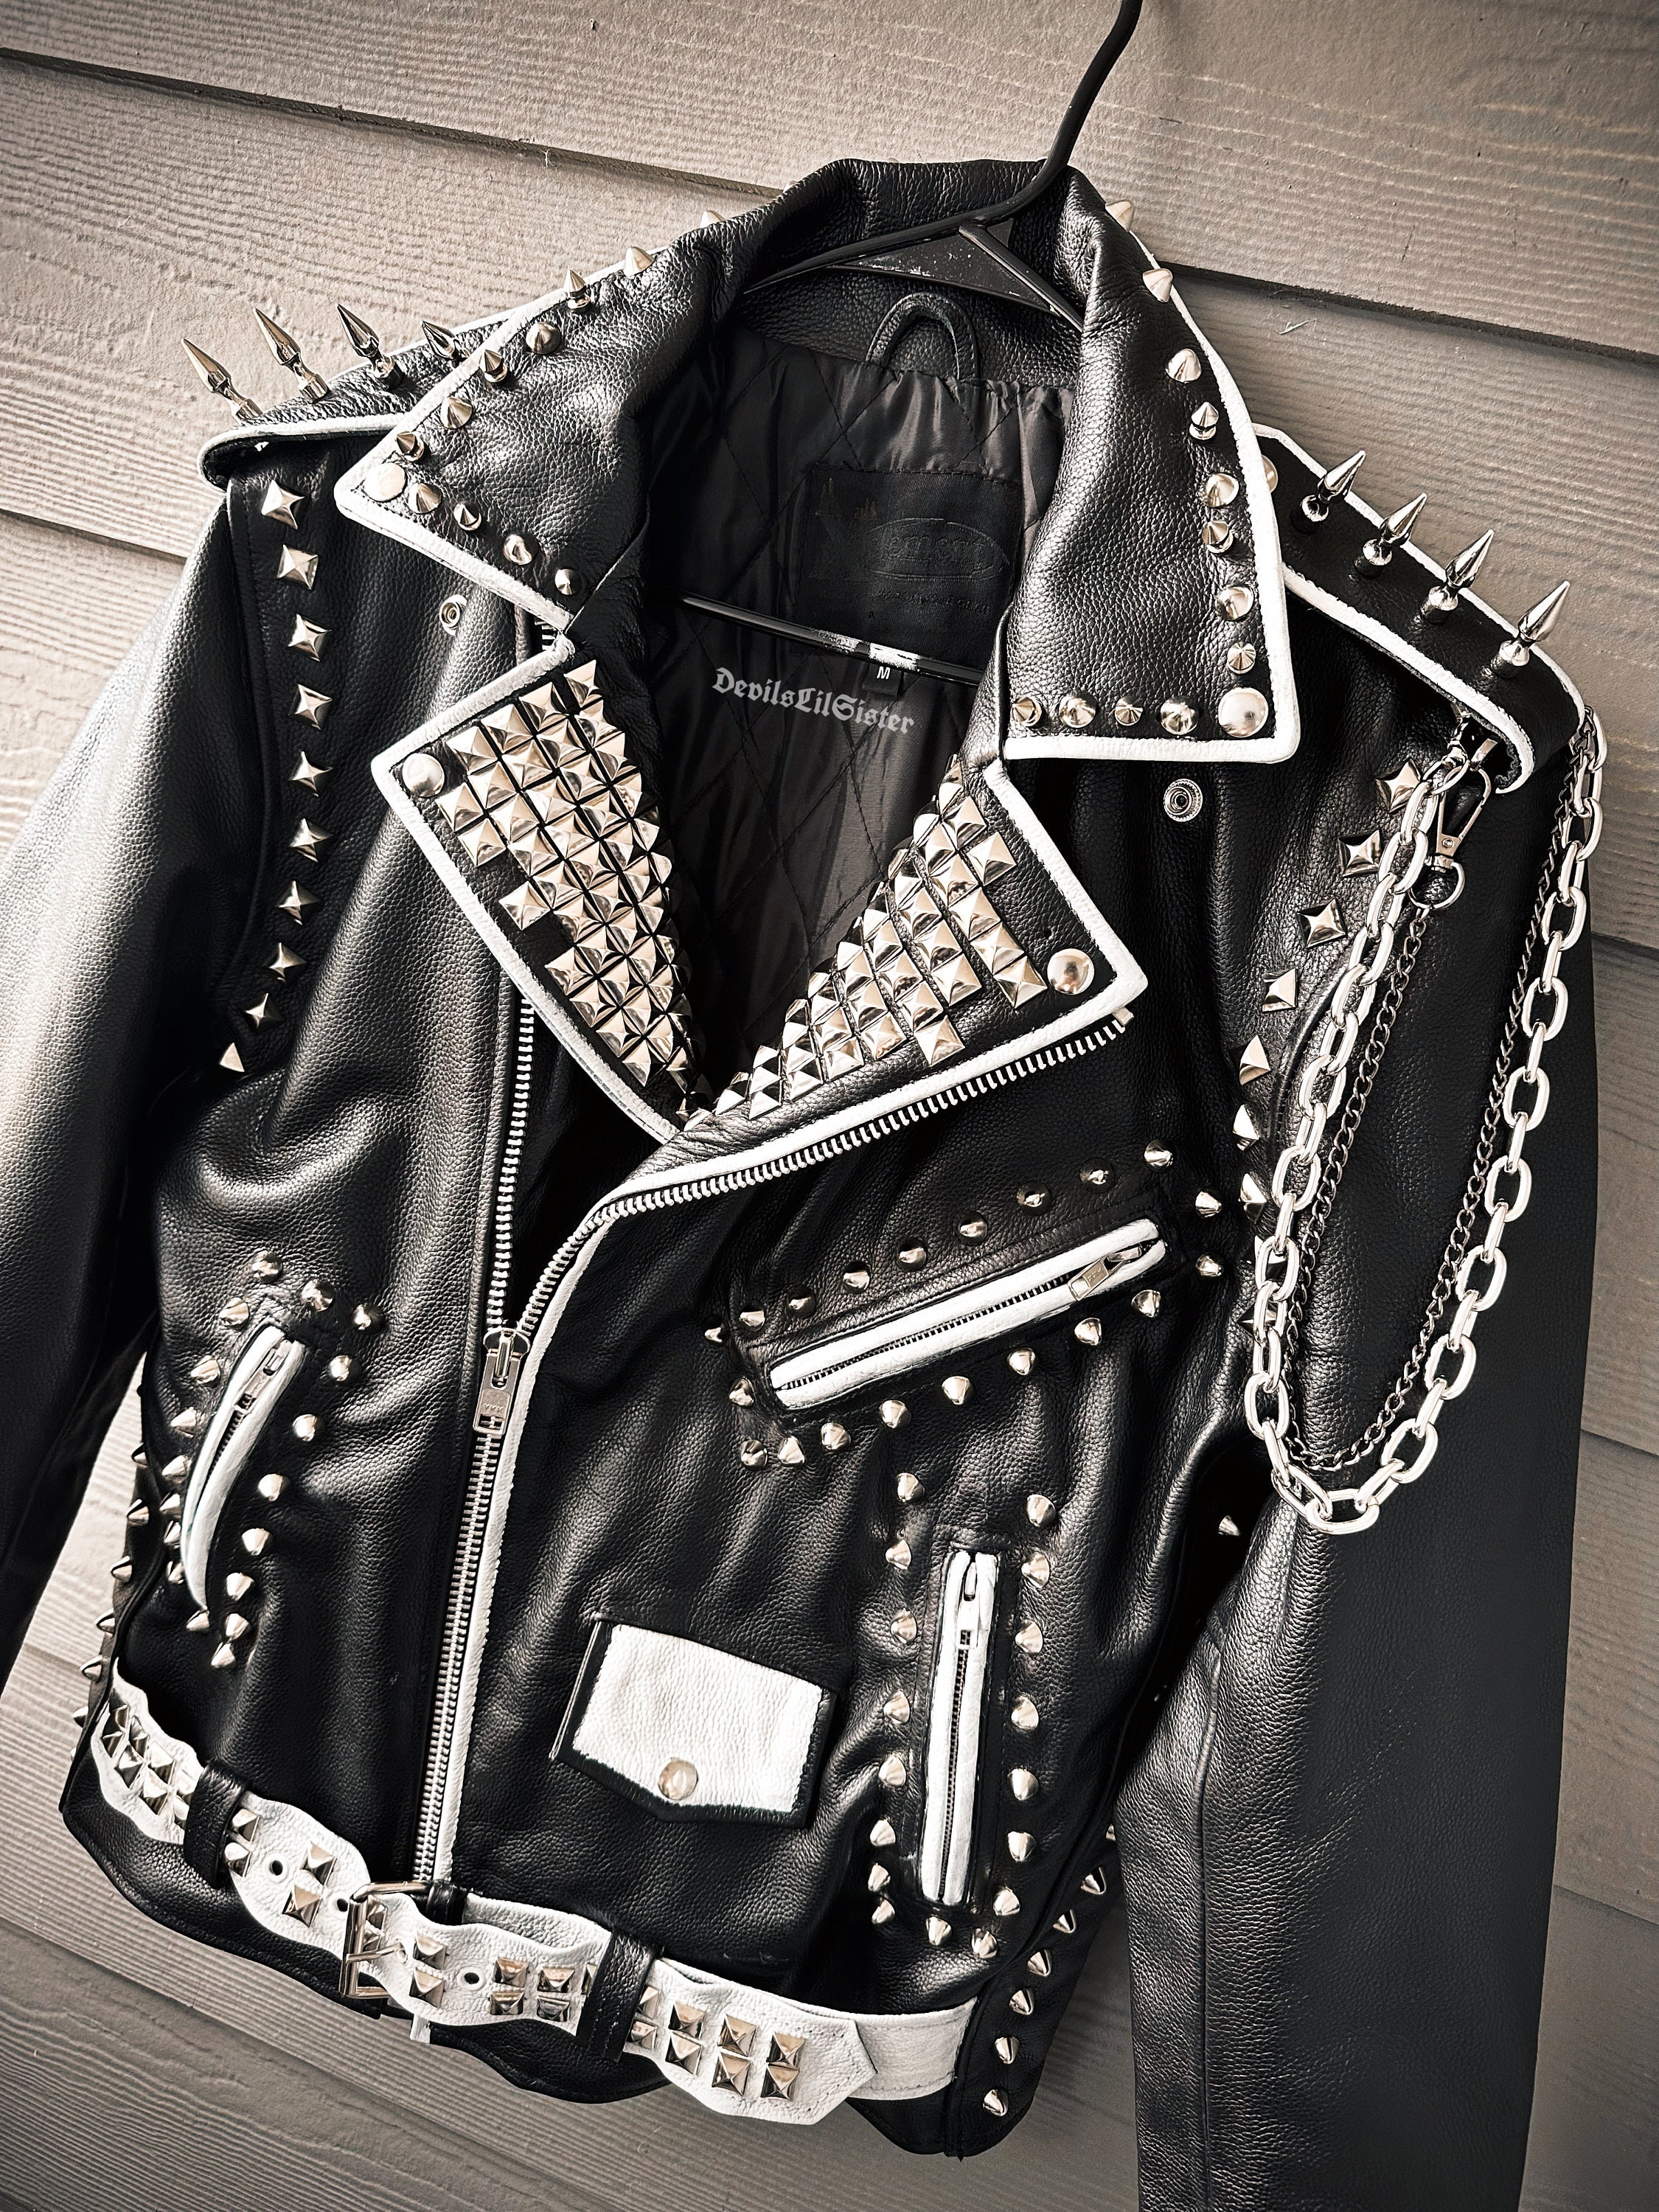 Custom Punk Studded Spiked Painted Jacket Leather/denim Official